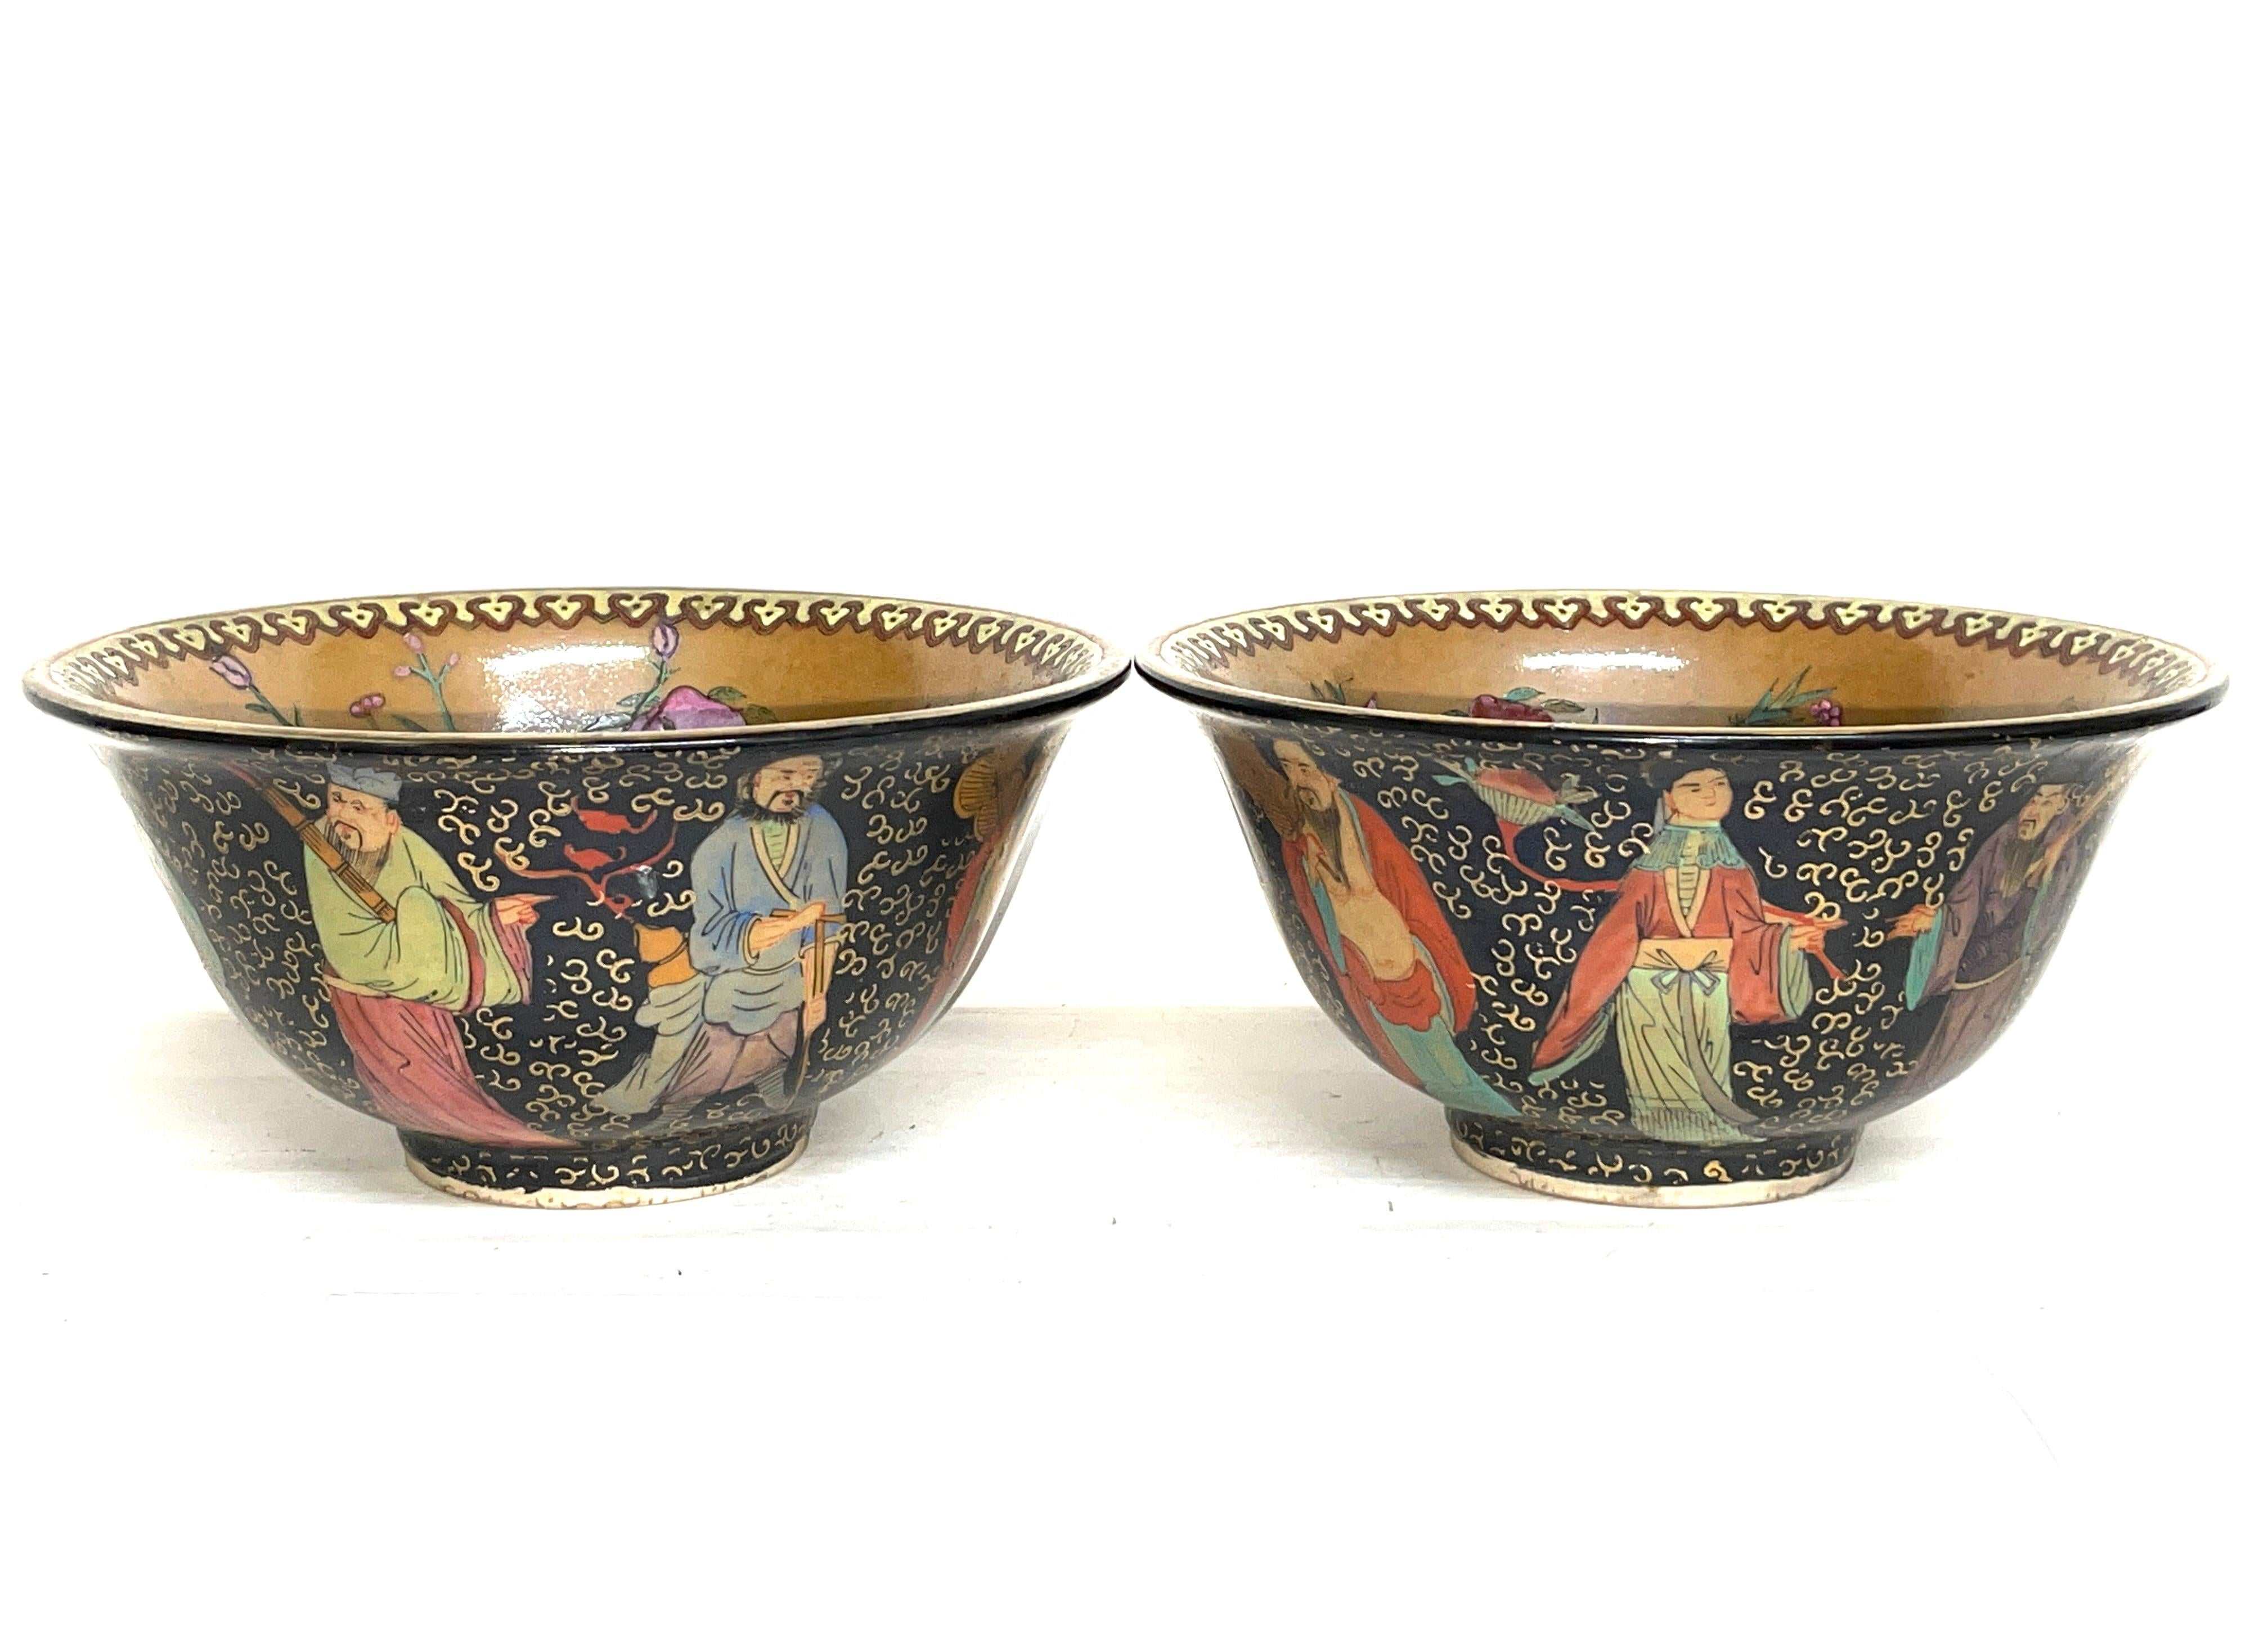 Pair of antique Chinese ceramic bowls. 20th century. Asian art.

Decorative and richly painted ceramic bowls.